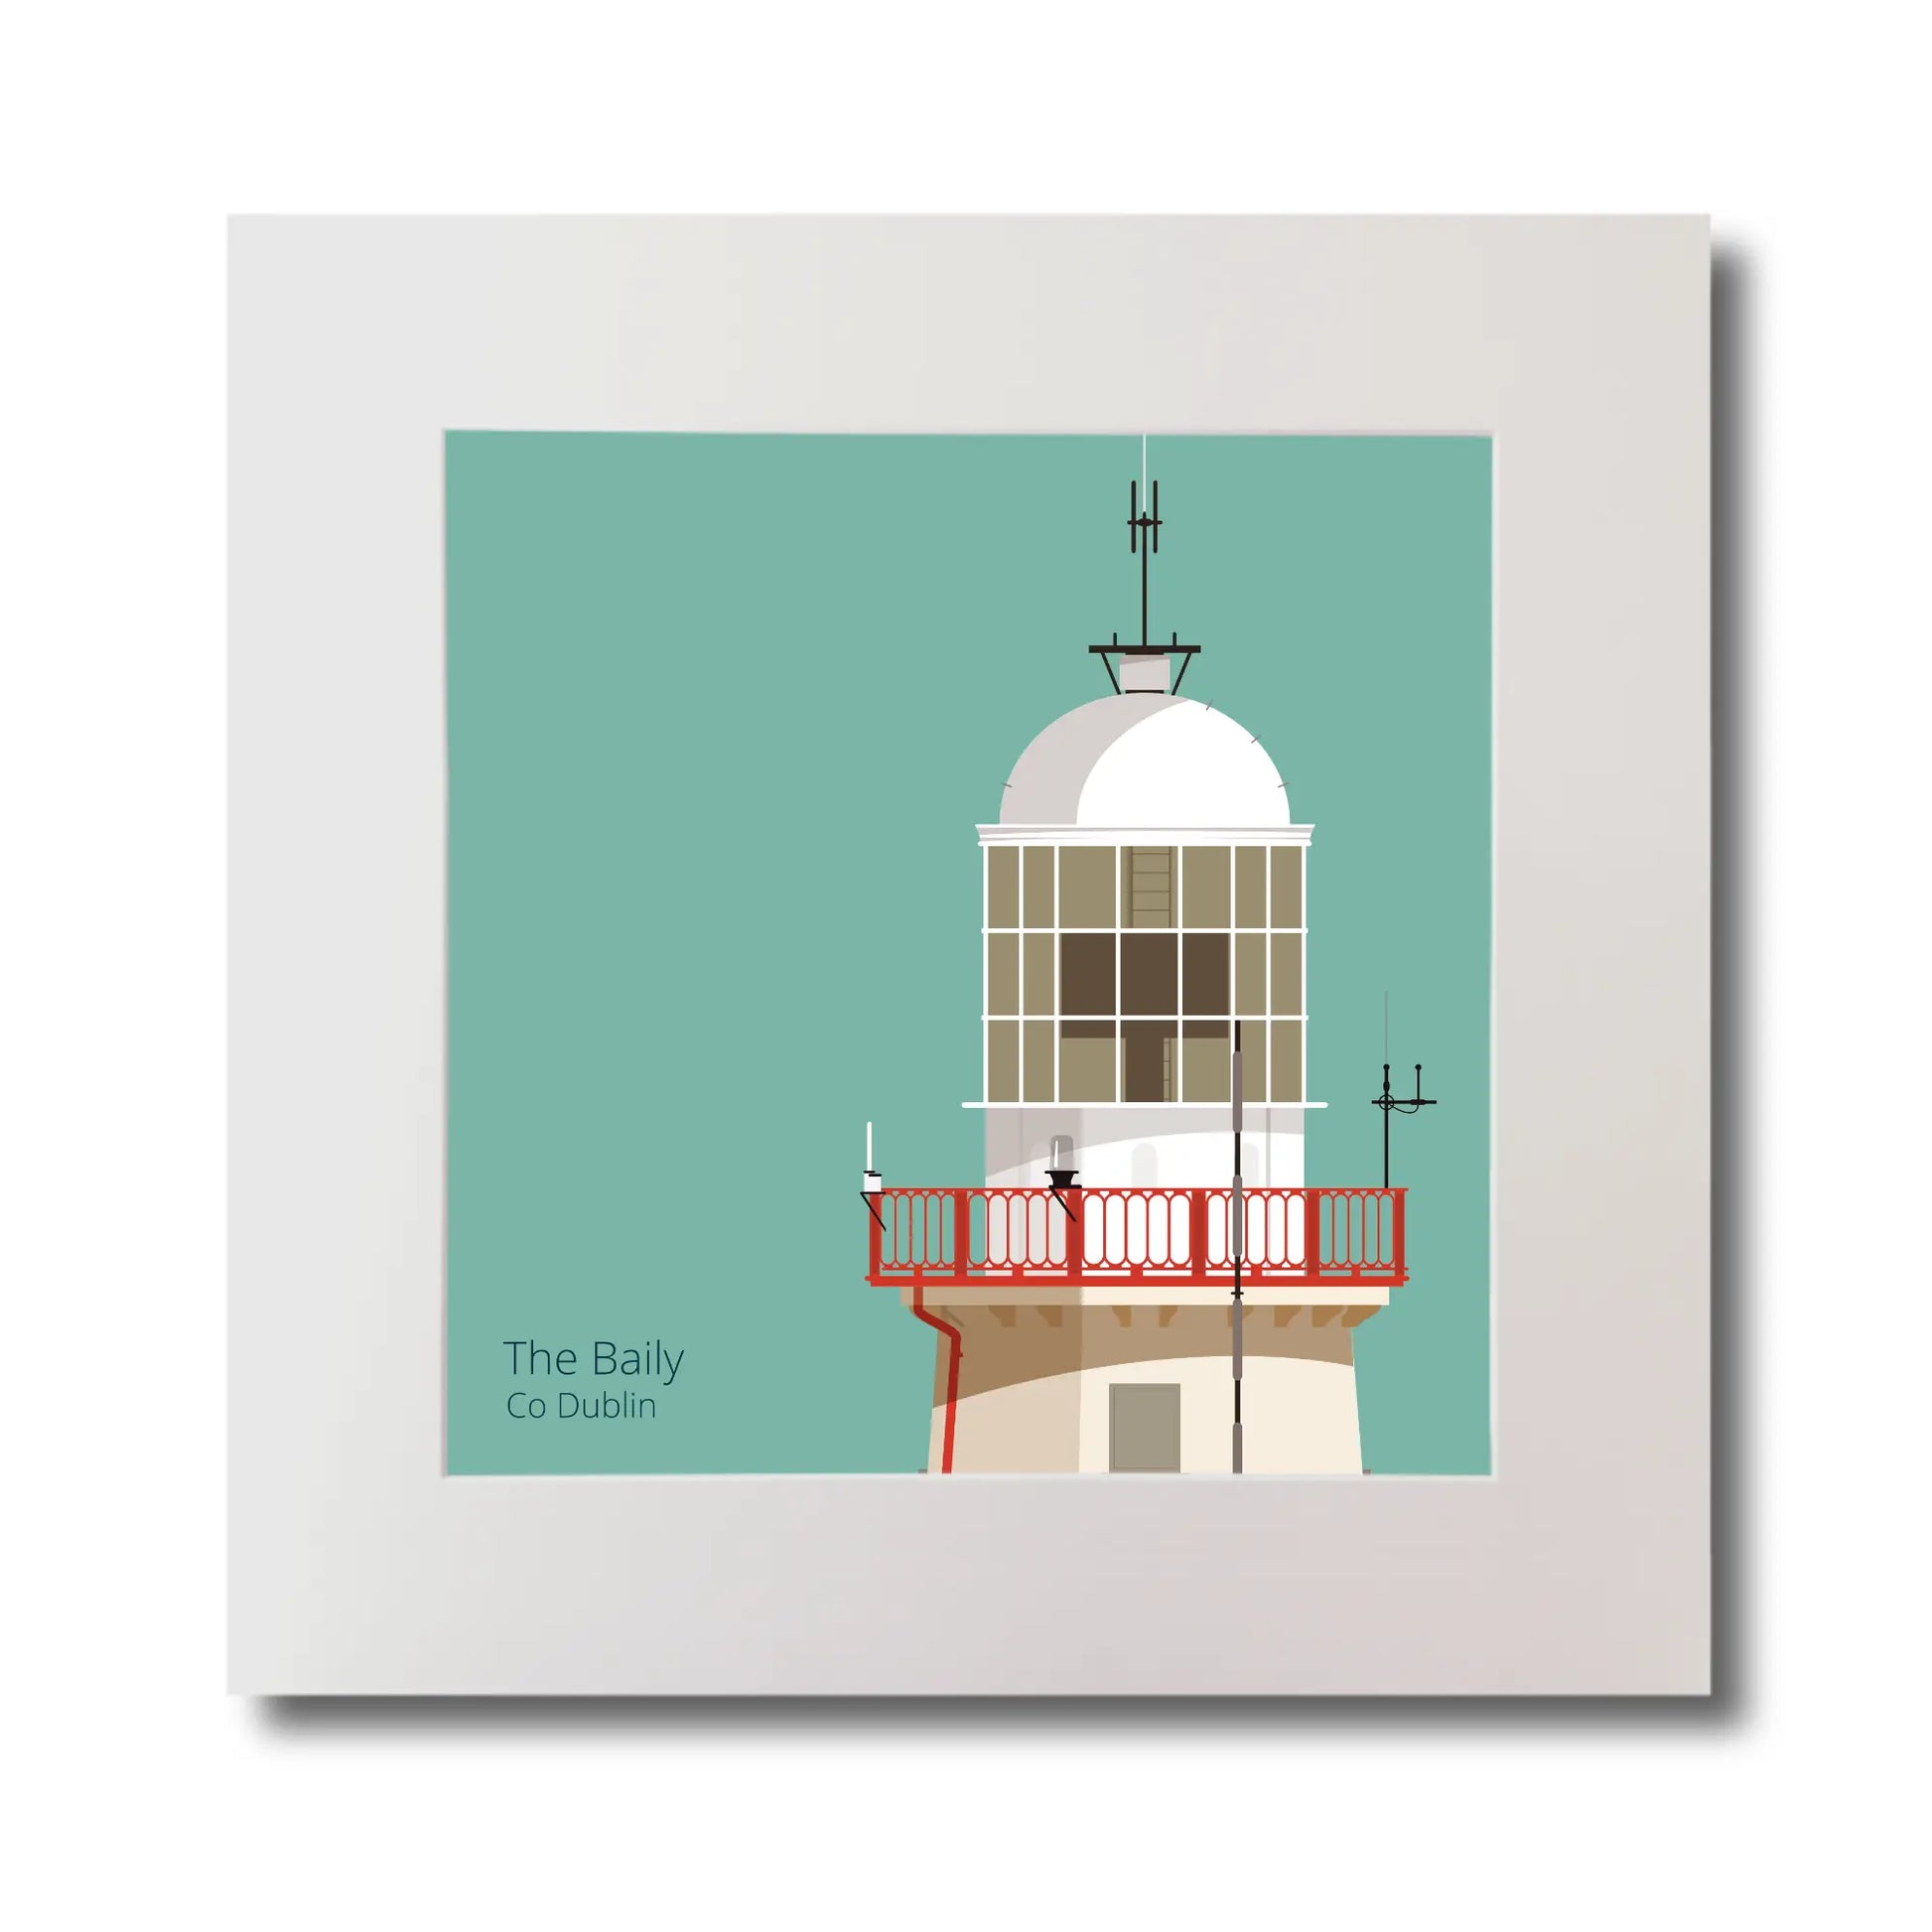 Illustration of The Baily lighthouse on an ocean green background, mounted and measuring 30x30cm.